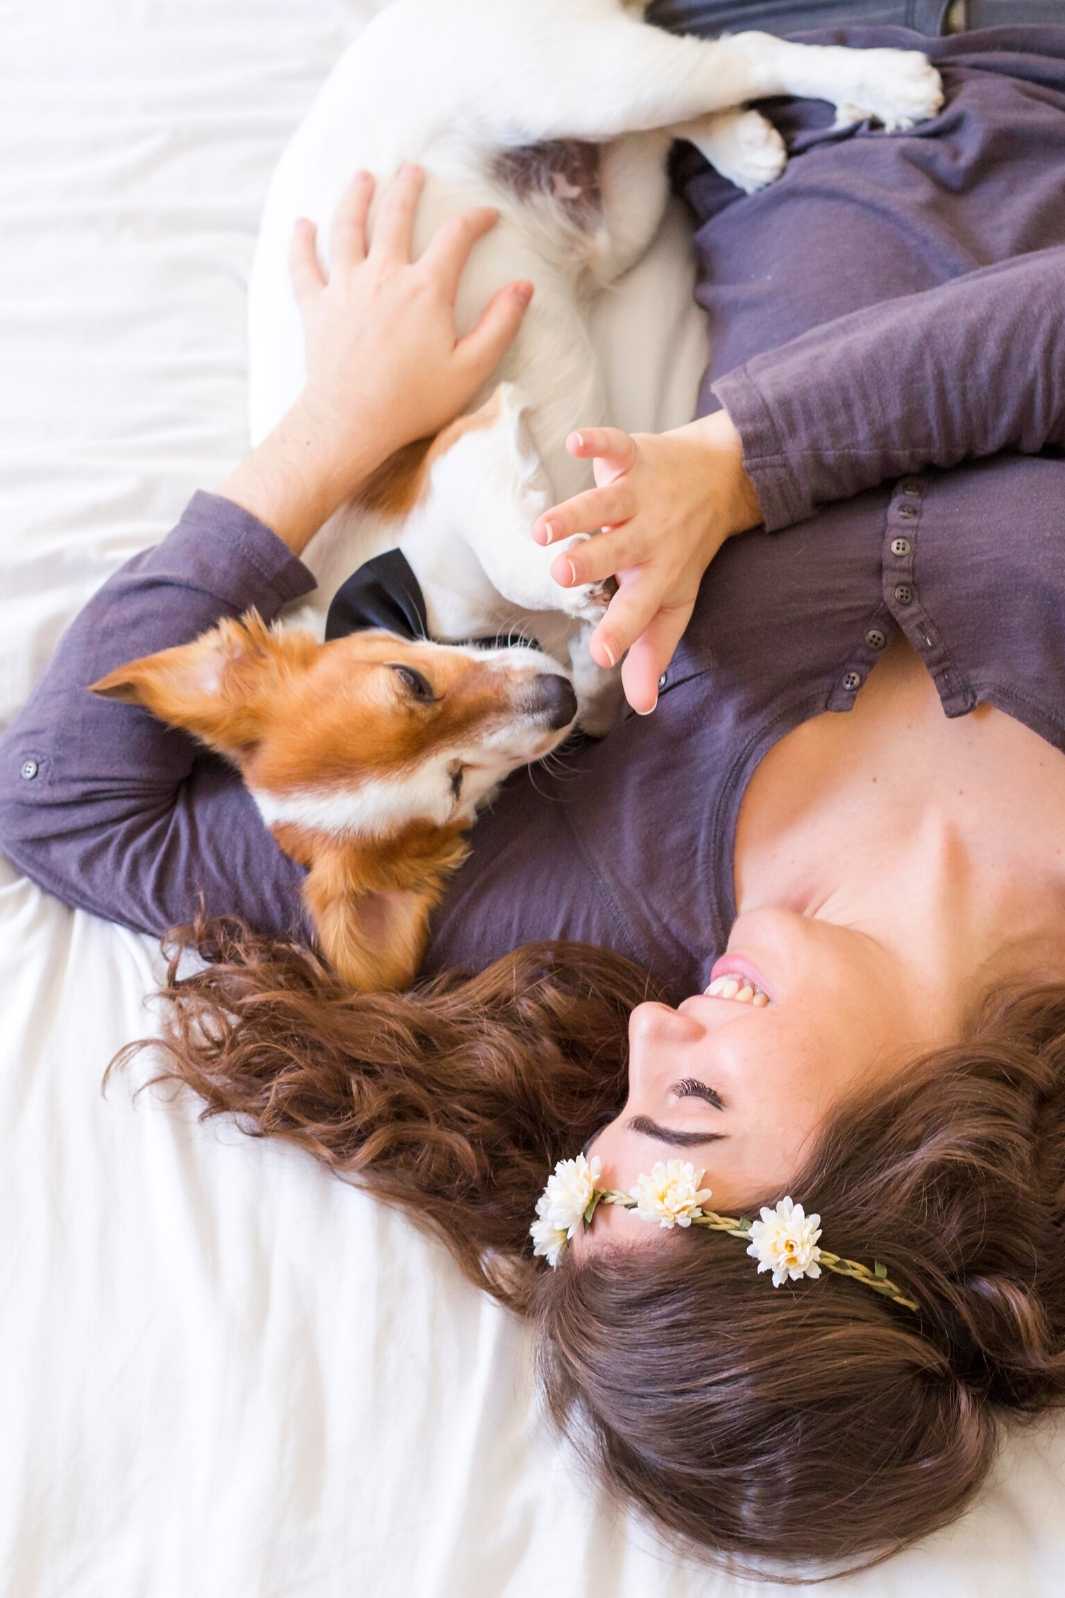 Young woman wearing a flower crown, lying on bed and cuddling with her cute small dog beside and celebrating National Hug Your Dog Day and National Pet Day!